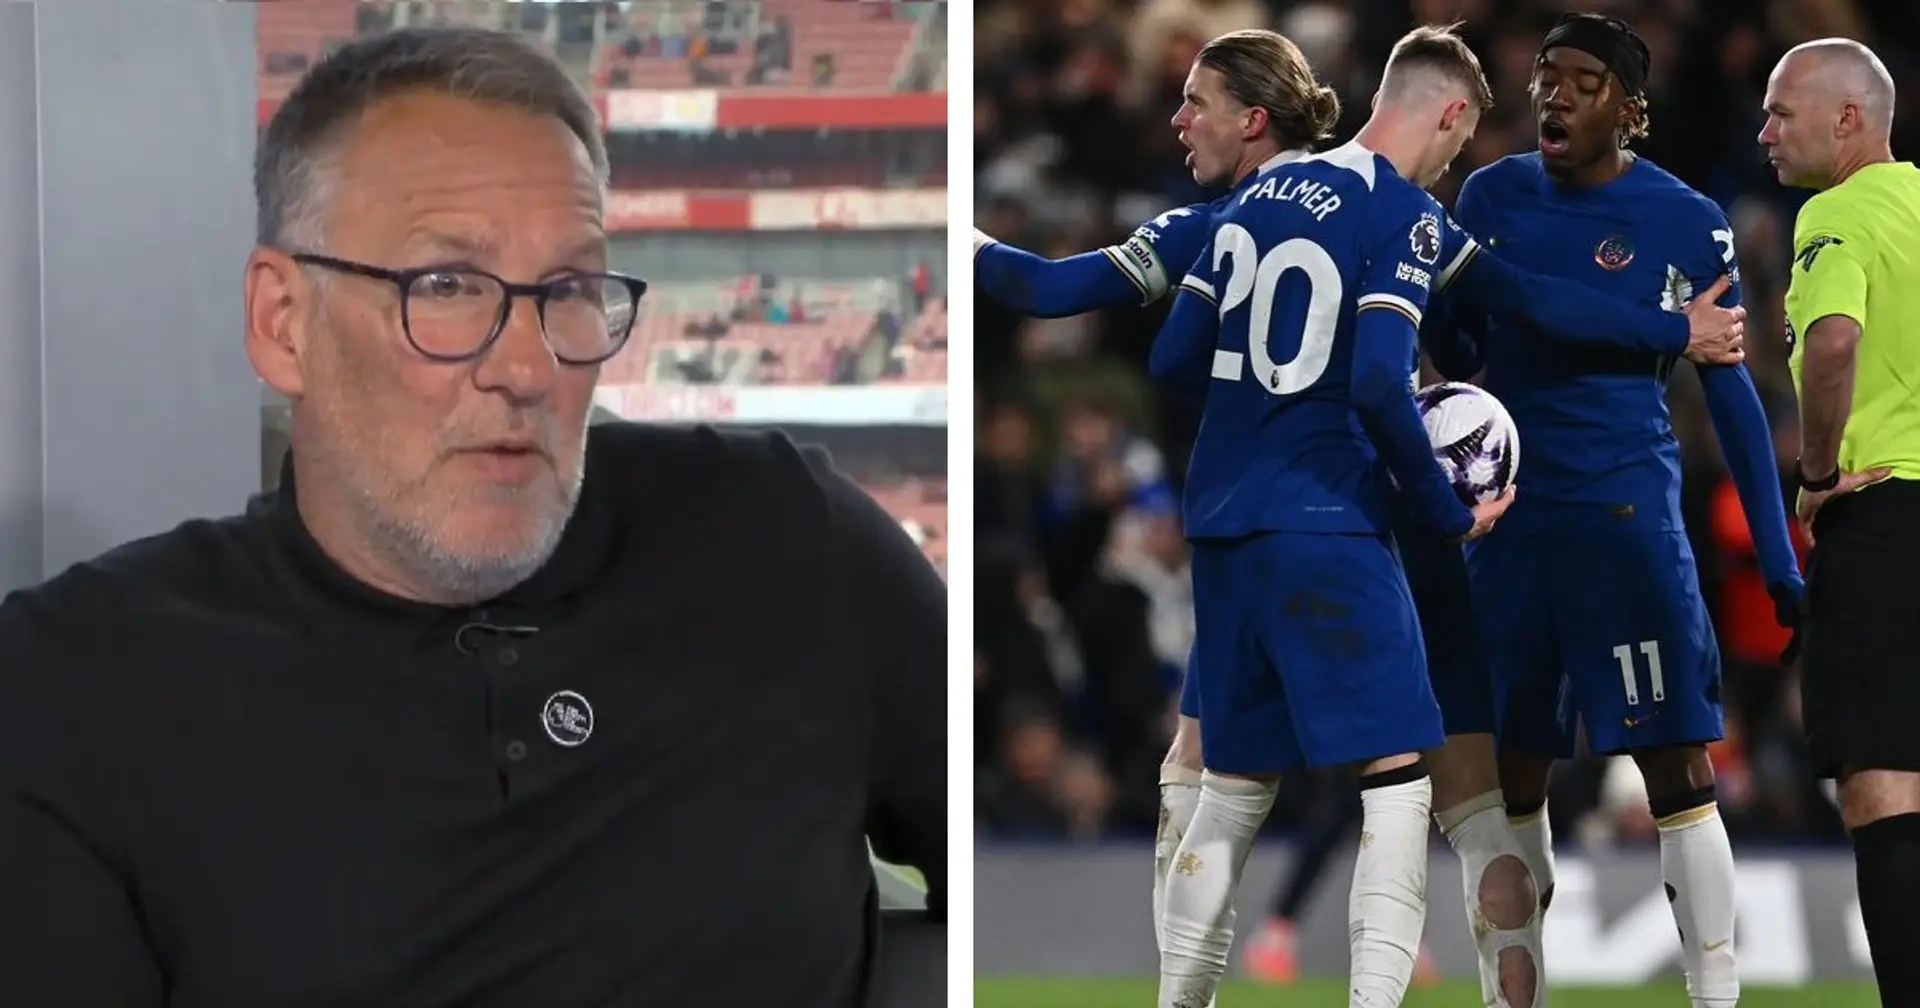 'The season is over already for Chelsea': Merson calls Blues 'shocking, unacceptable circus' 